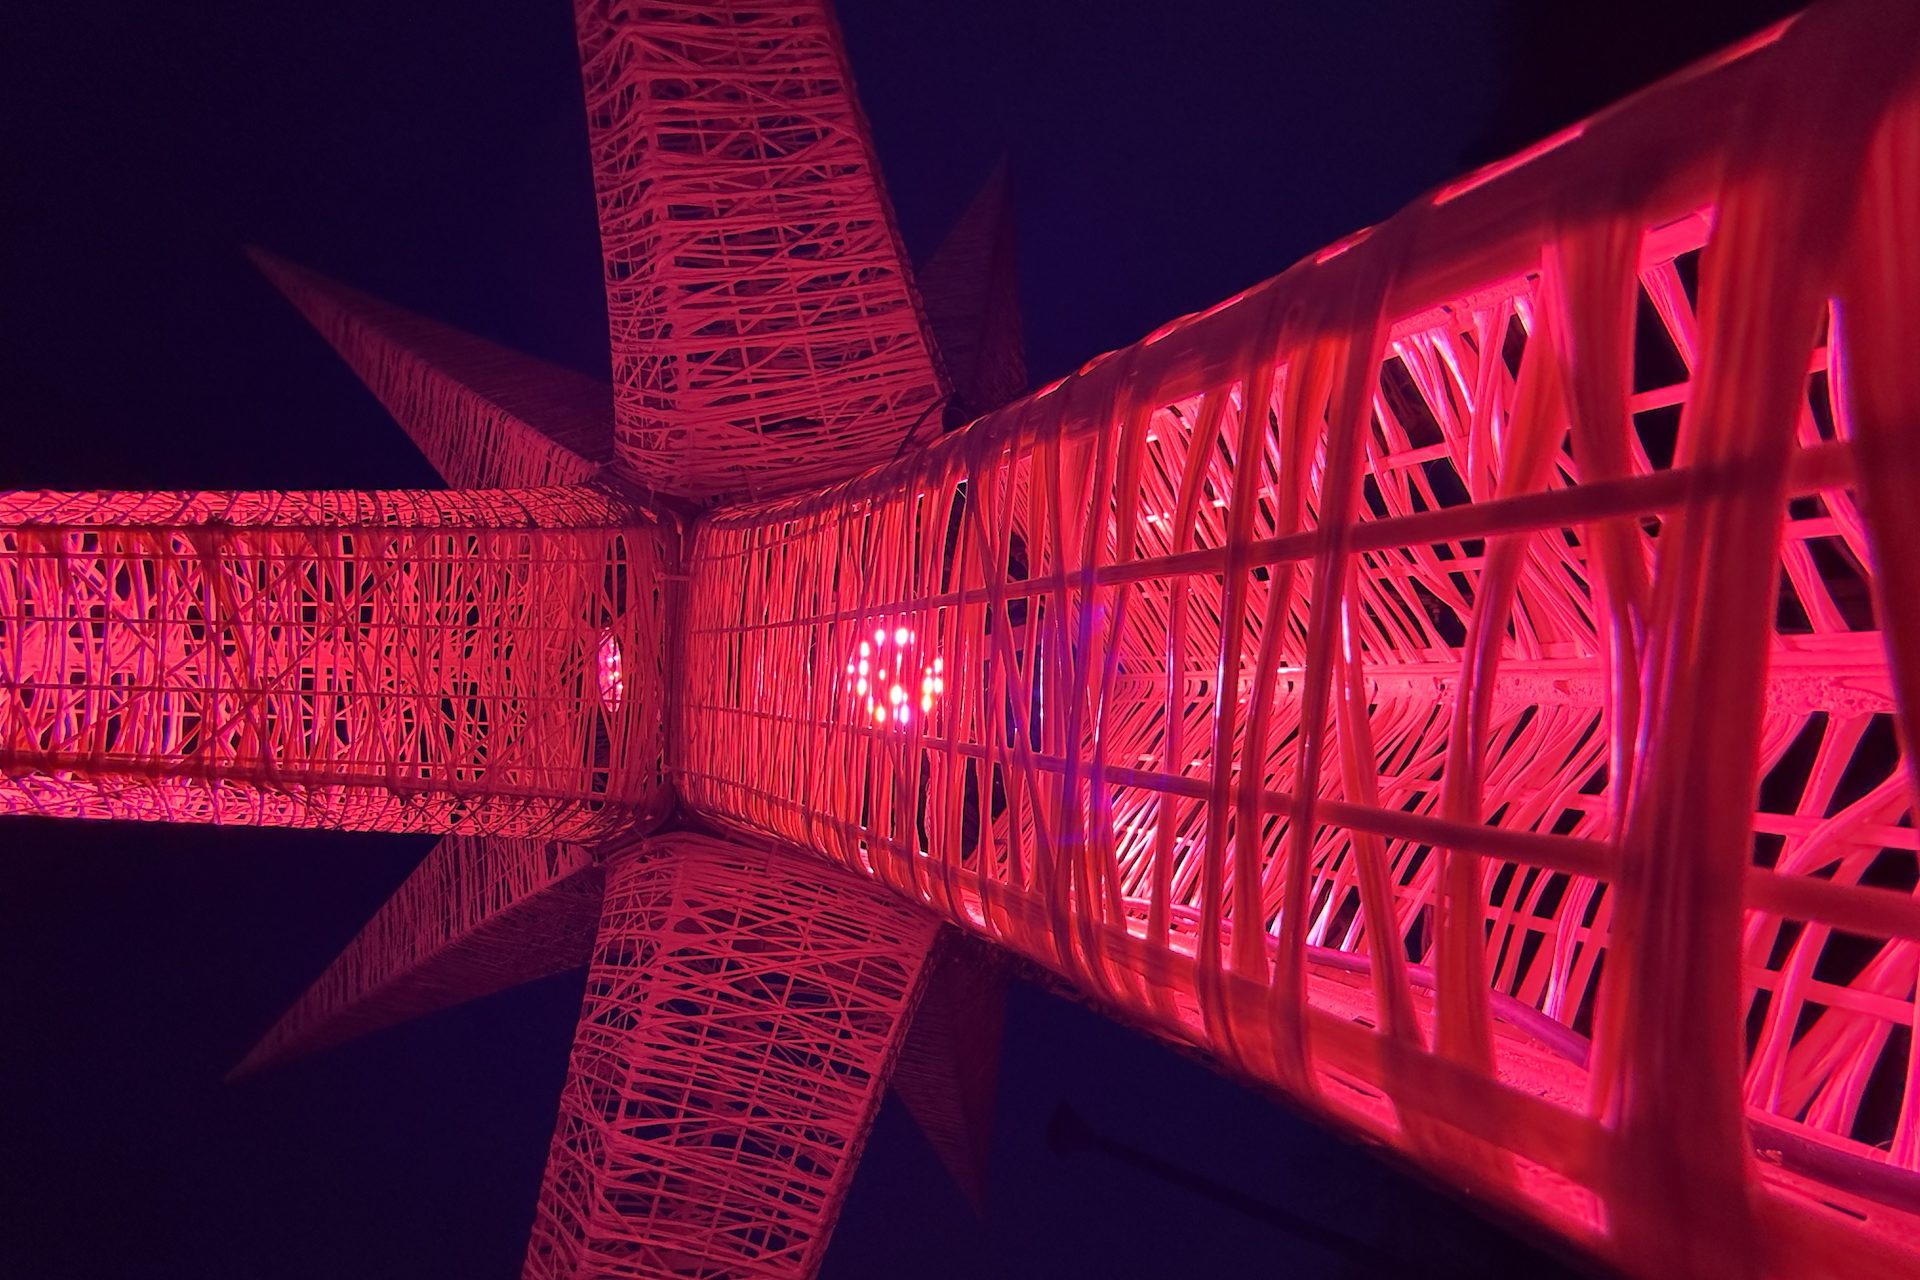 A public art structure, illuminated in red, stretches across a blue background